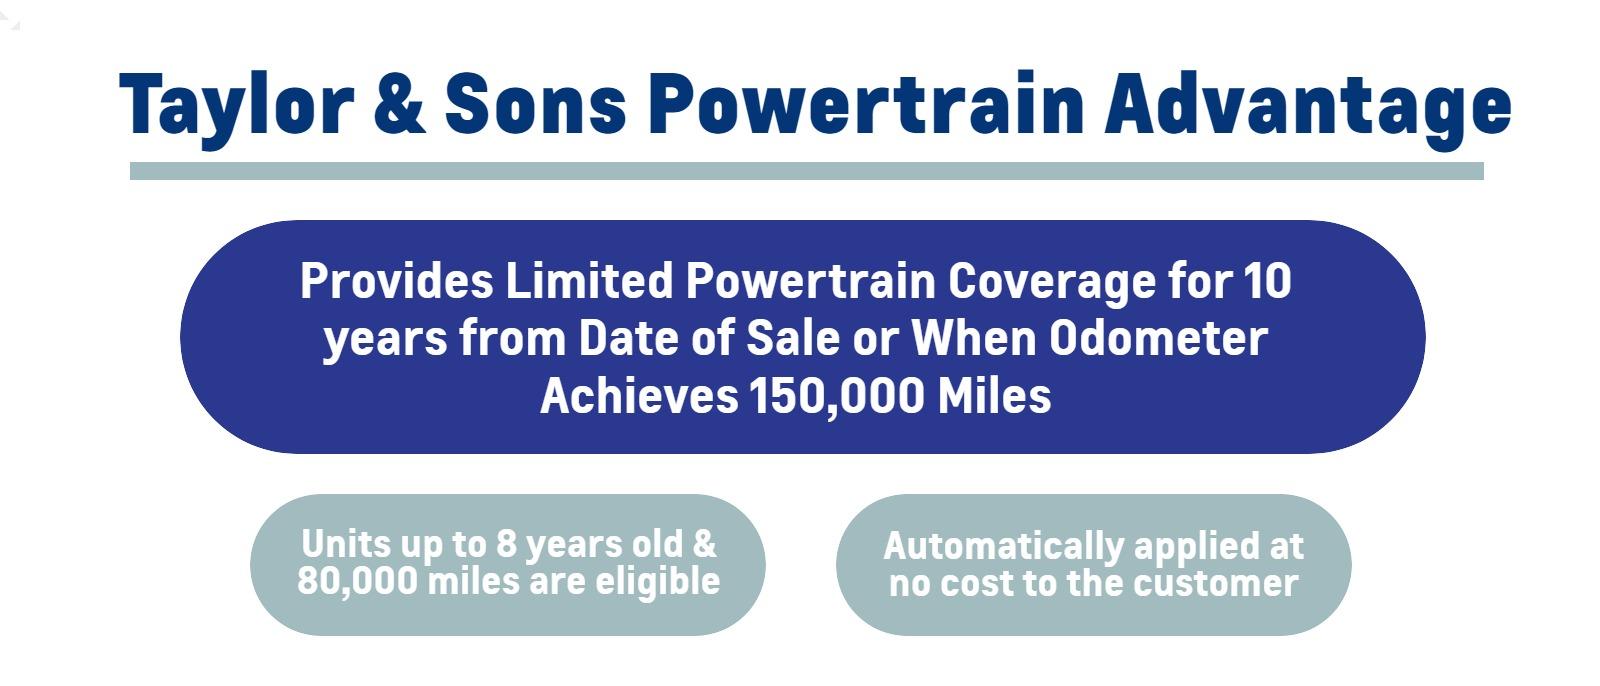 Taylor & Sons Powertrain Advantage

Provides Limited Powertrain Coverage for 10 years from Date of Sale or 
When Odometer Achieves 150,000 Miles

Units up to 8 years old or
80,000 miles are eligible

Automatically applied at no cost to the customer